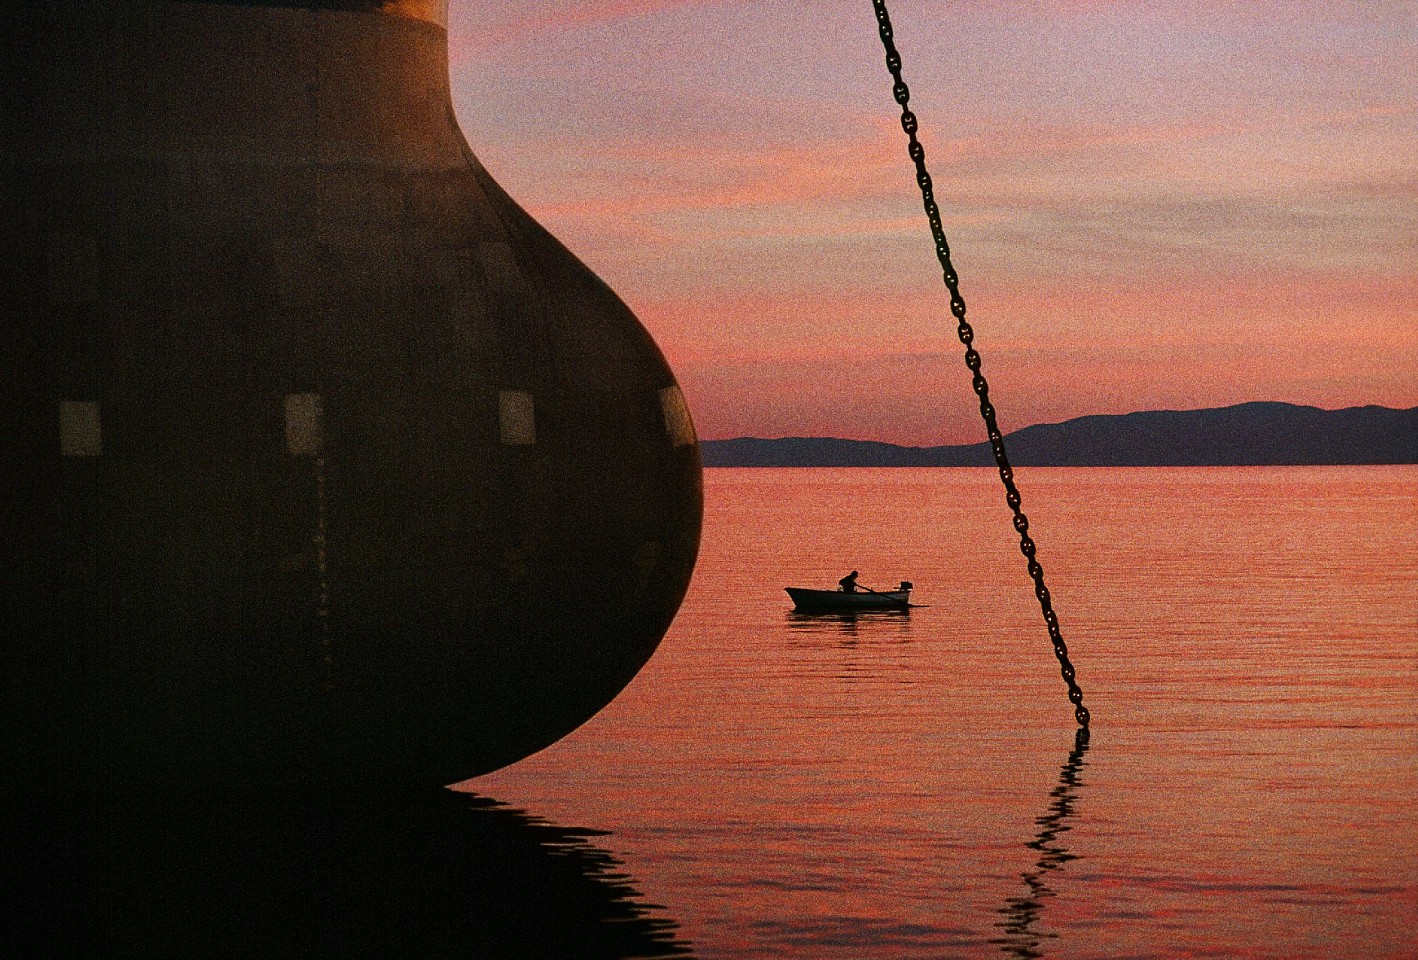 Steve McCurry, Rowboat at Sunset, 1989
FujiFlex Crystal Archive Print
Price/Size on request